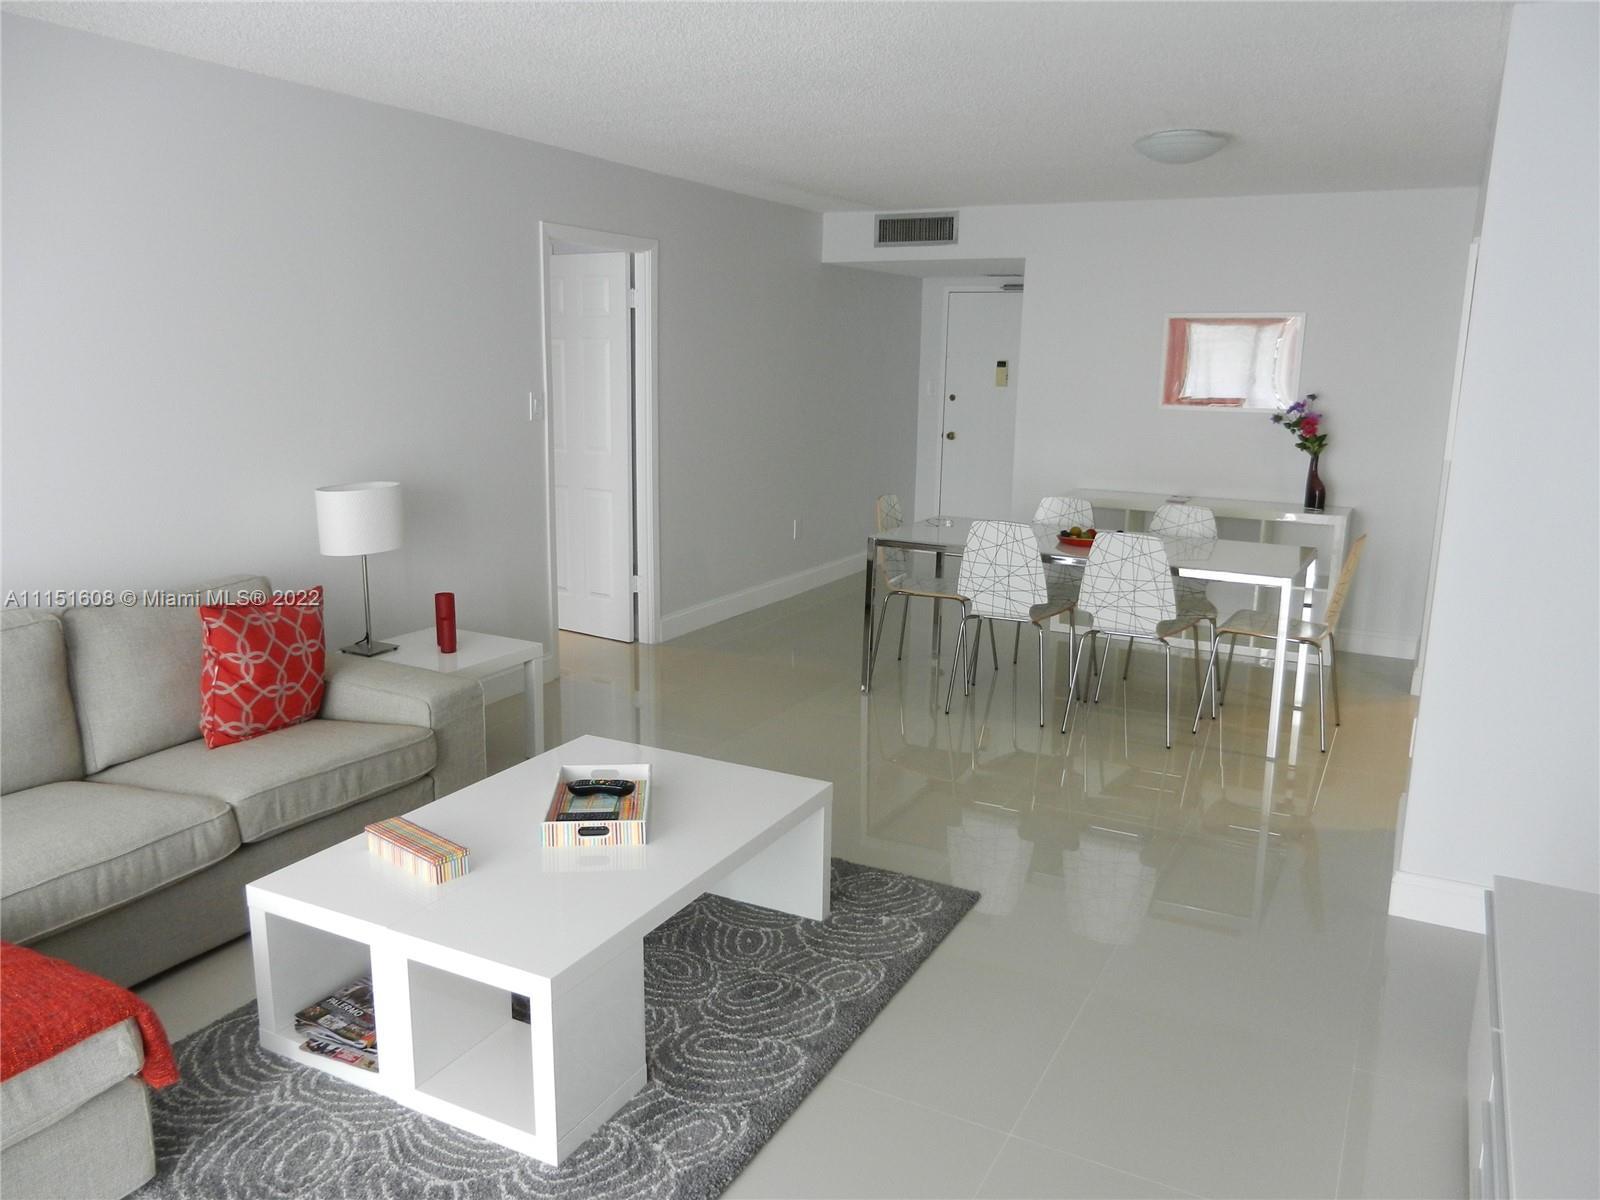 Great water view. spacious unit 1251 SQ FT. Split unit with bathroom inside each room. Tile floor th